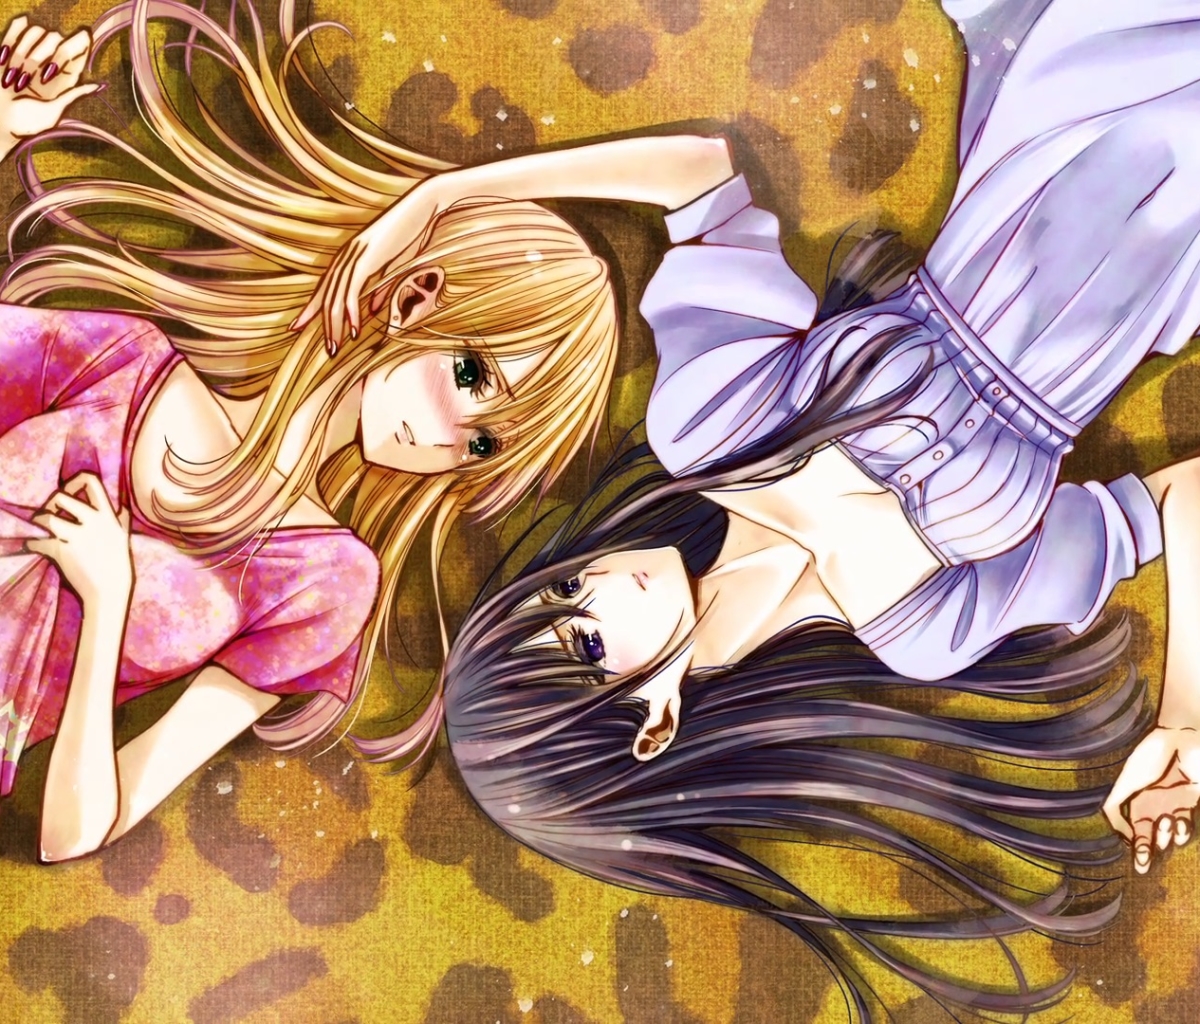 Why You Should Check Out Yuri Anime Citrus - Sales Mitch - Rice Digital-demhanvico.com.vn